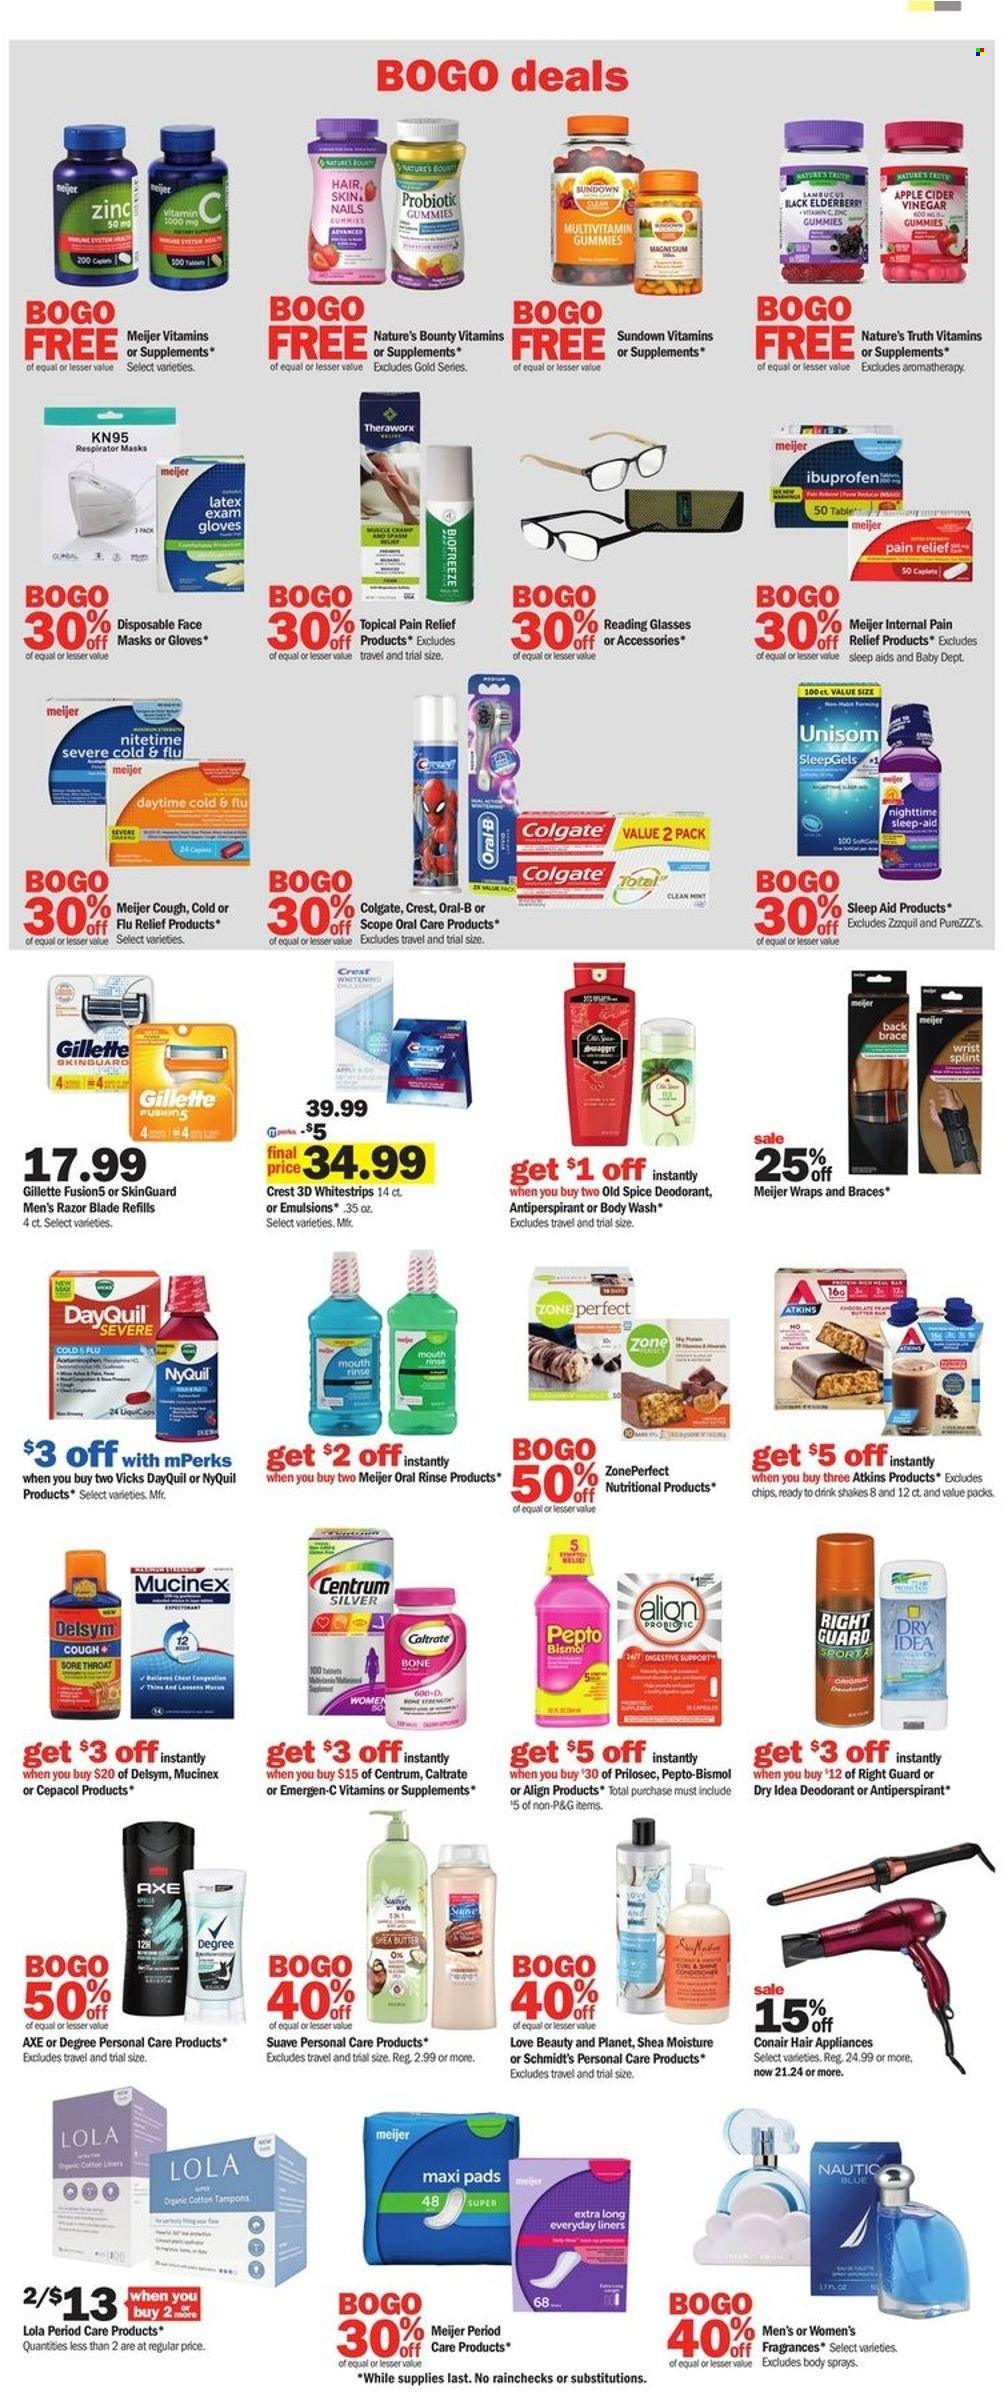 thumbnail - Meijer Flyer - 09/25/2022 - 10/01/2022 - Sales products - wraps, shake, Digestive, chips, Zone Perfect, spice, apple cider vinegar, body wash, Suave, Old Spice, Colgate, Oral-B, Crest, sanitary pads, tampons, shea butter, anti-perspirant, deodorant, Axe, Gillette, razor, Vicks, cap, scope, DayQuil, Delsym, Cold & Flu, magnesium, Mucinex, multivitamin, Nature's Bounty, Nature's Truth, Unisom, Ibuprofen, pain relief, Pepto-bismol, NyQuil, zinc, Emergen-C, Centrum. Page 12.